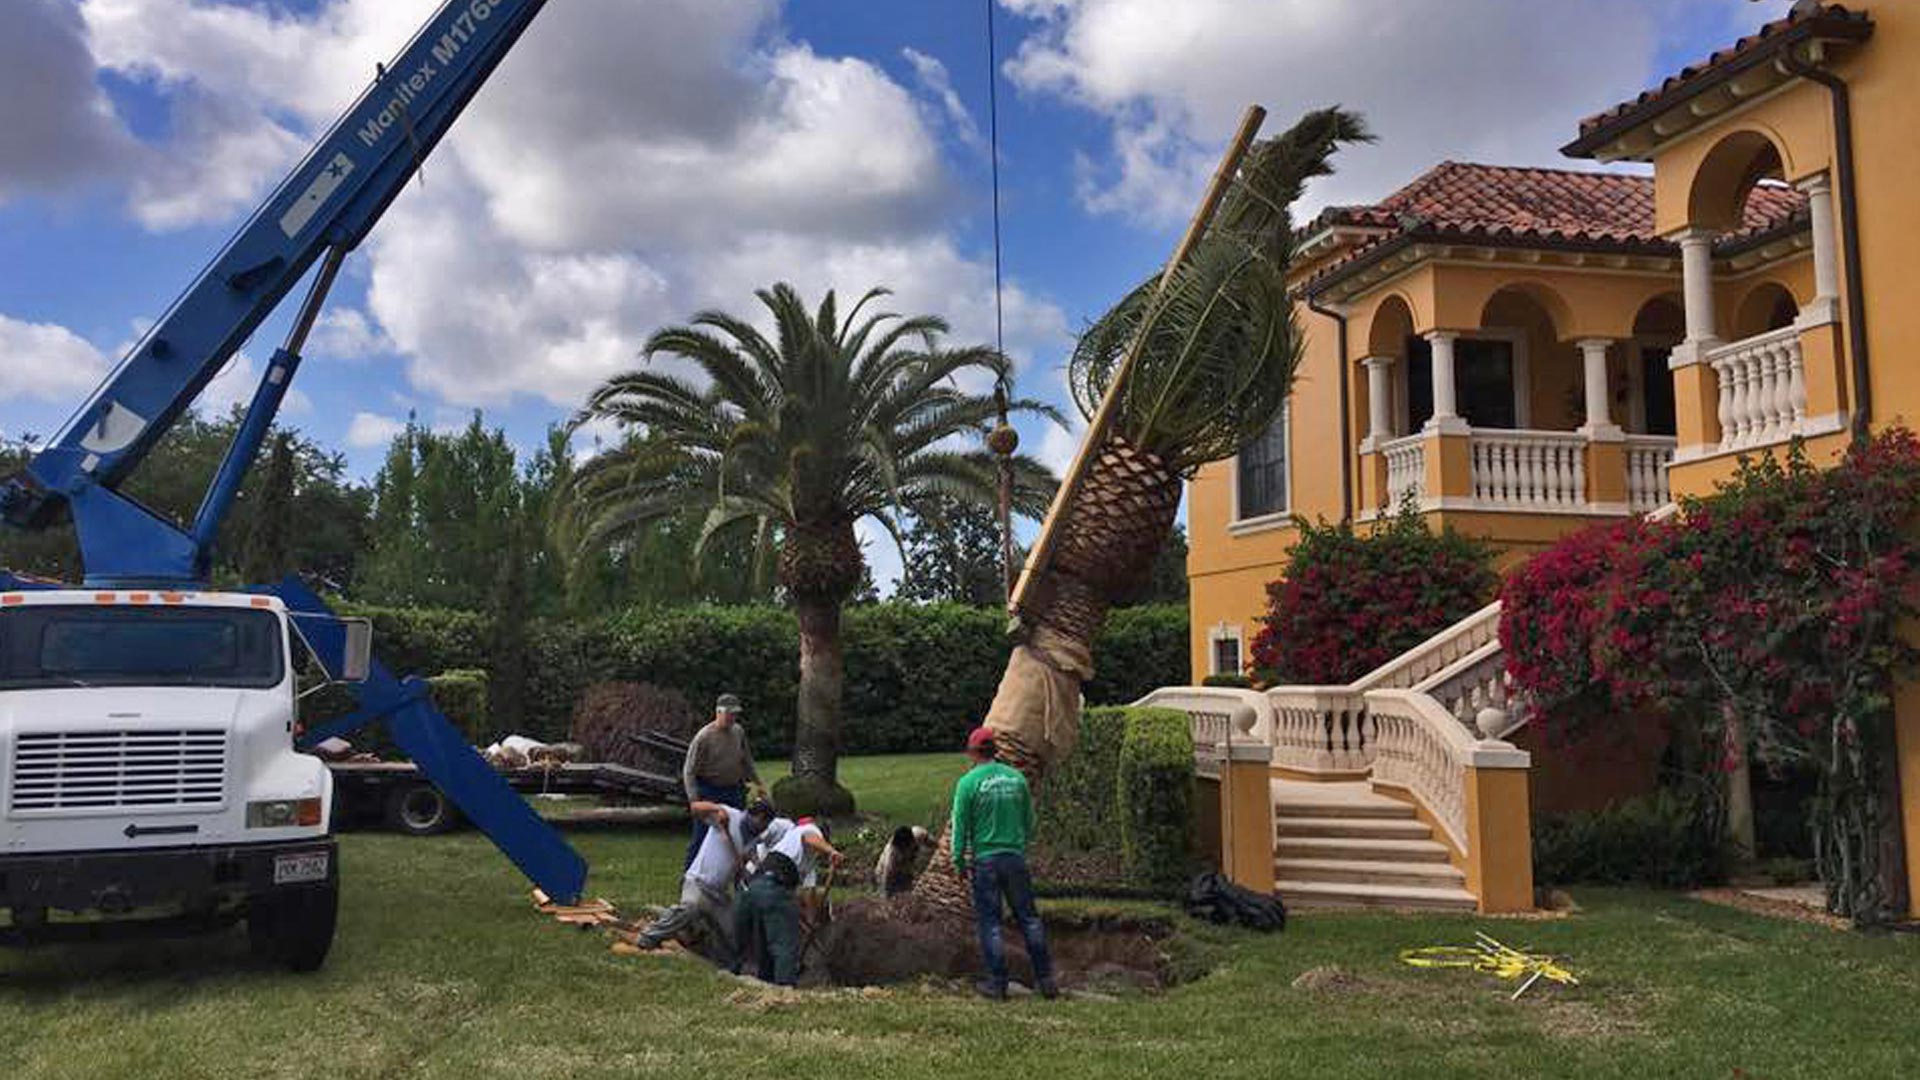 Large palm tree being installed at residential property.